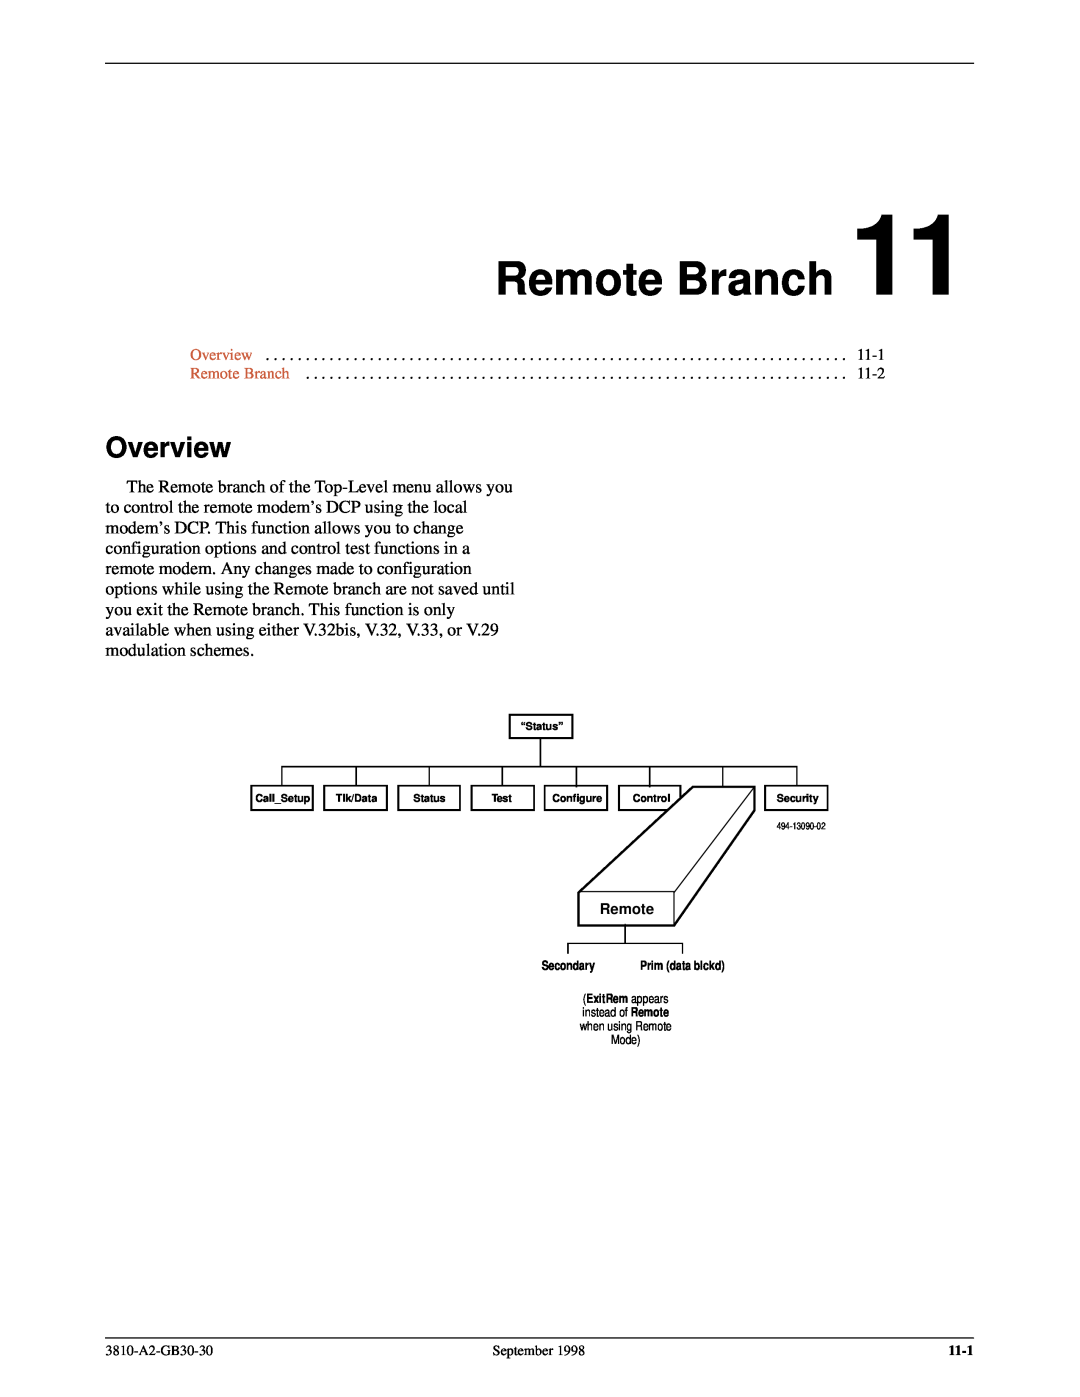 Paradyne 3800 manual Remote Branch, Overview 